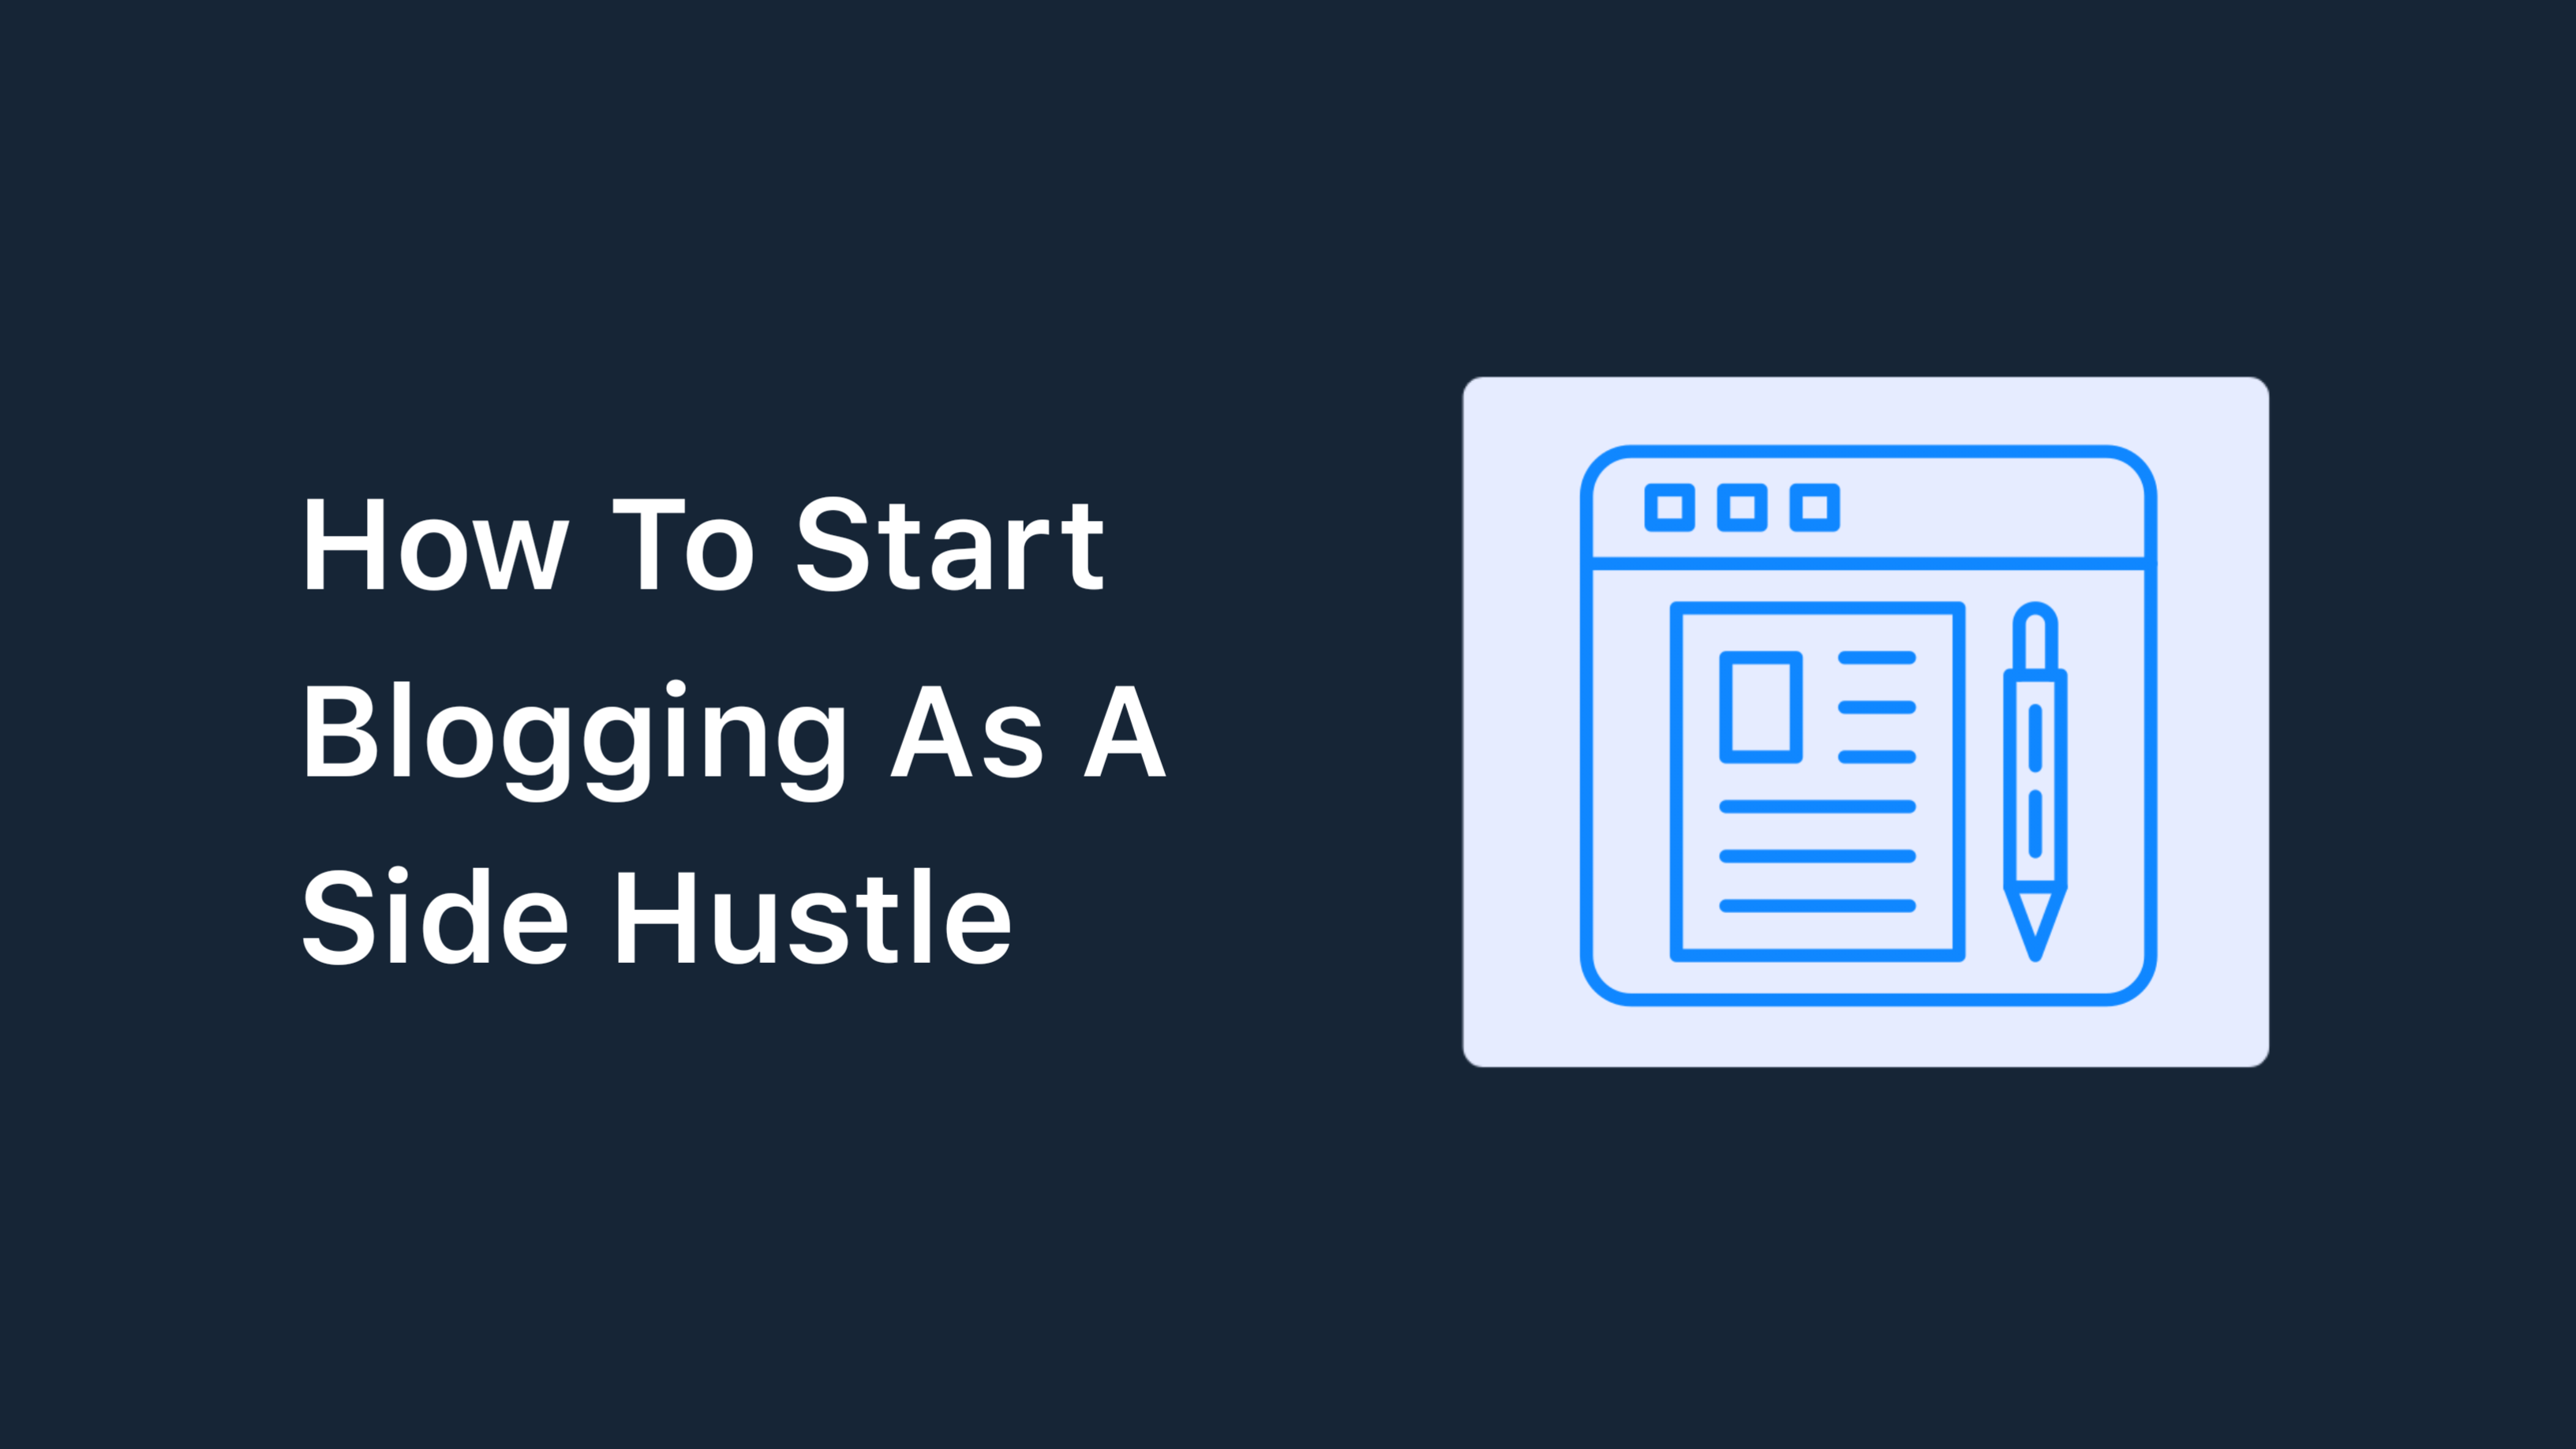 How To Start Blogging As A Side Hustle